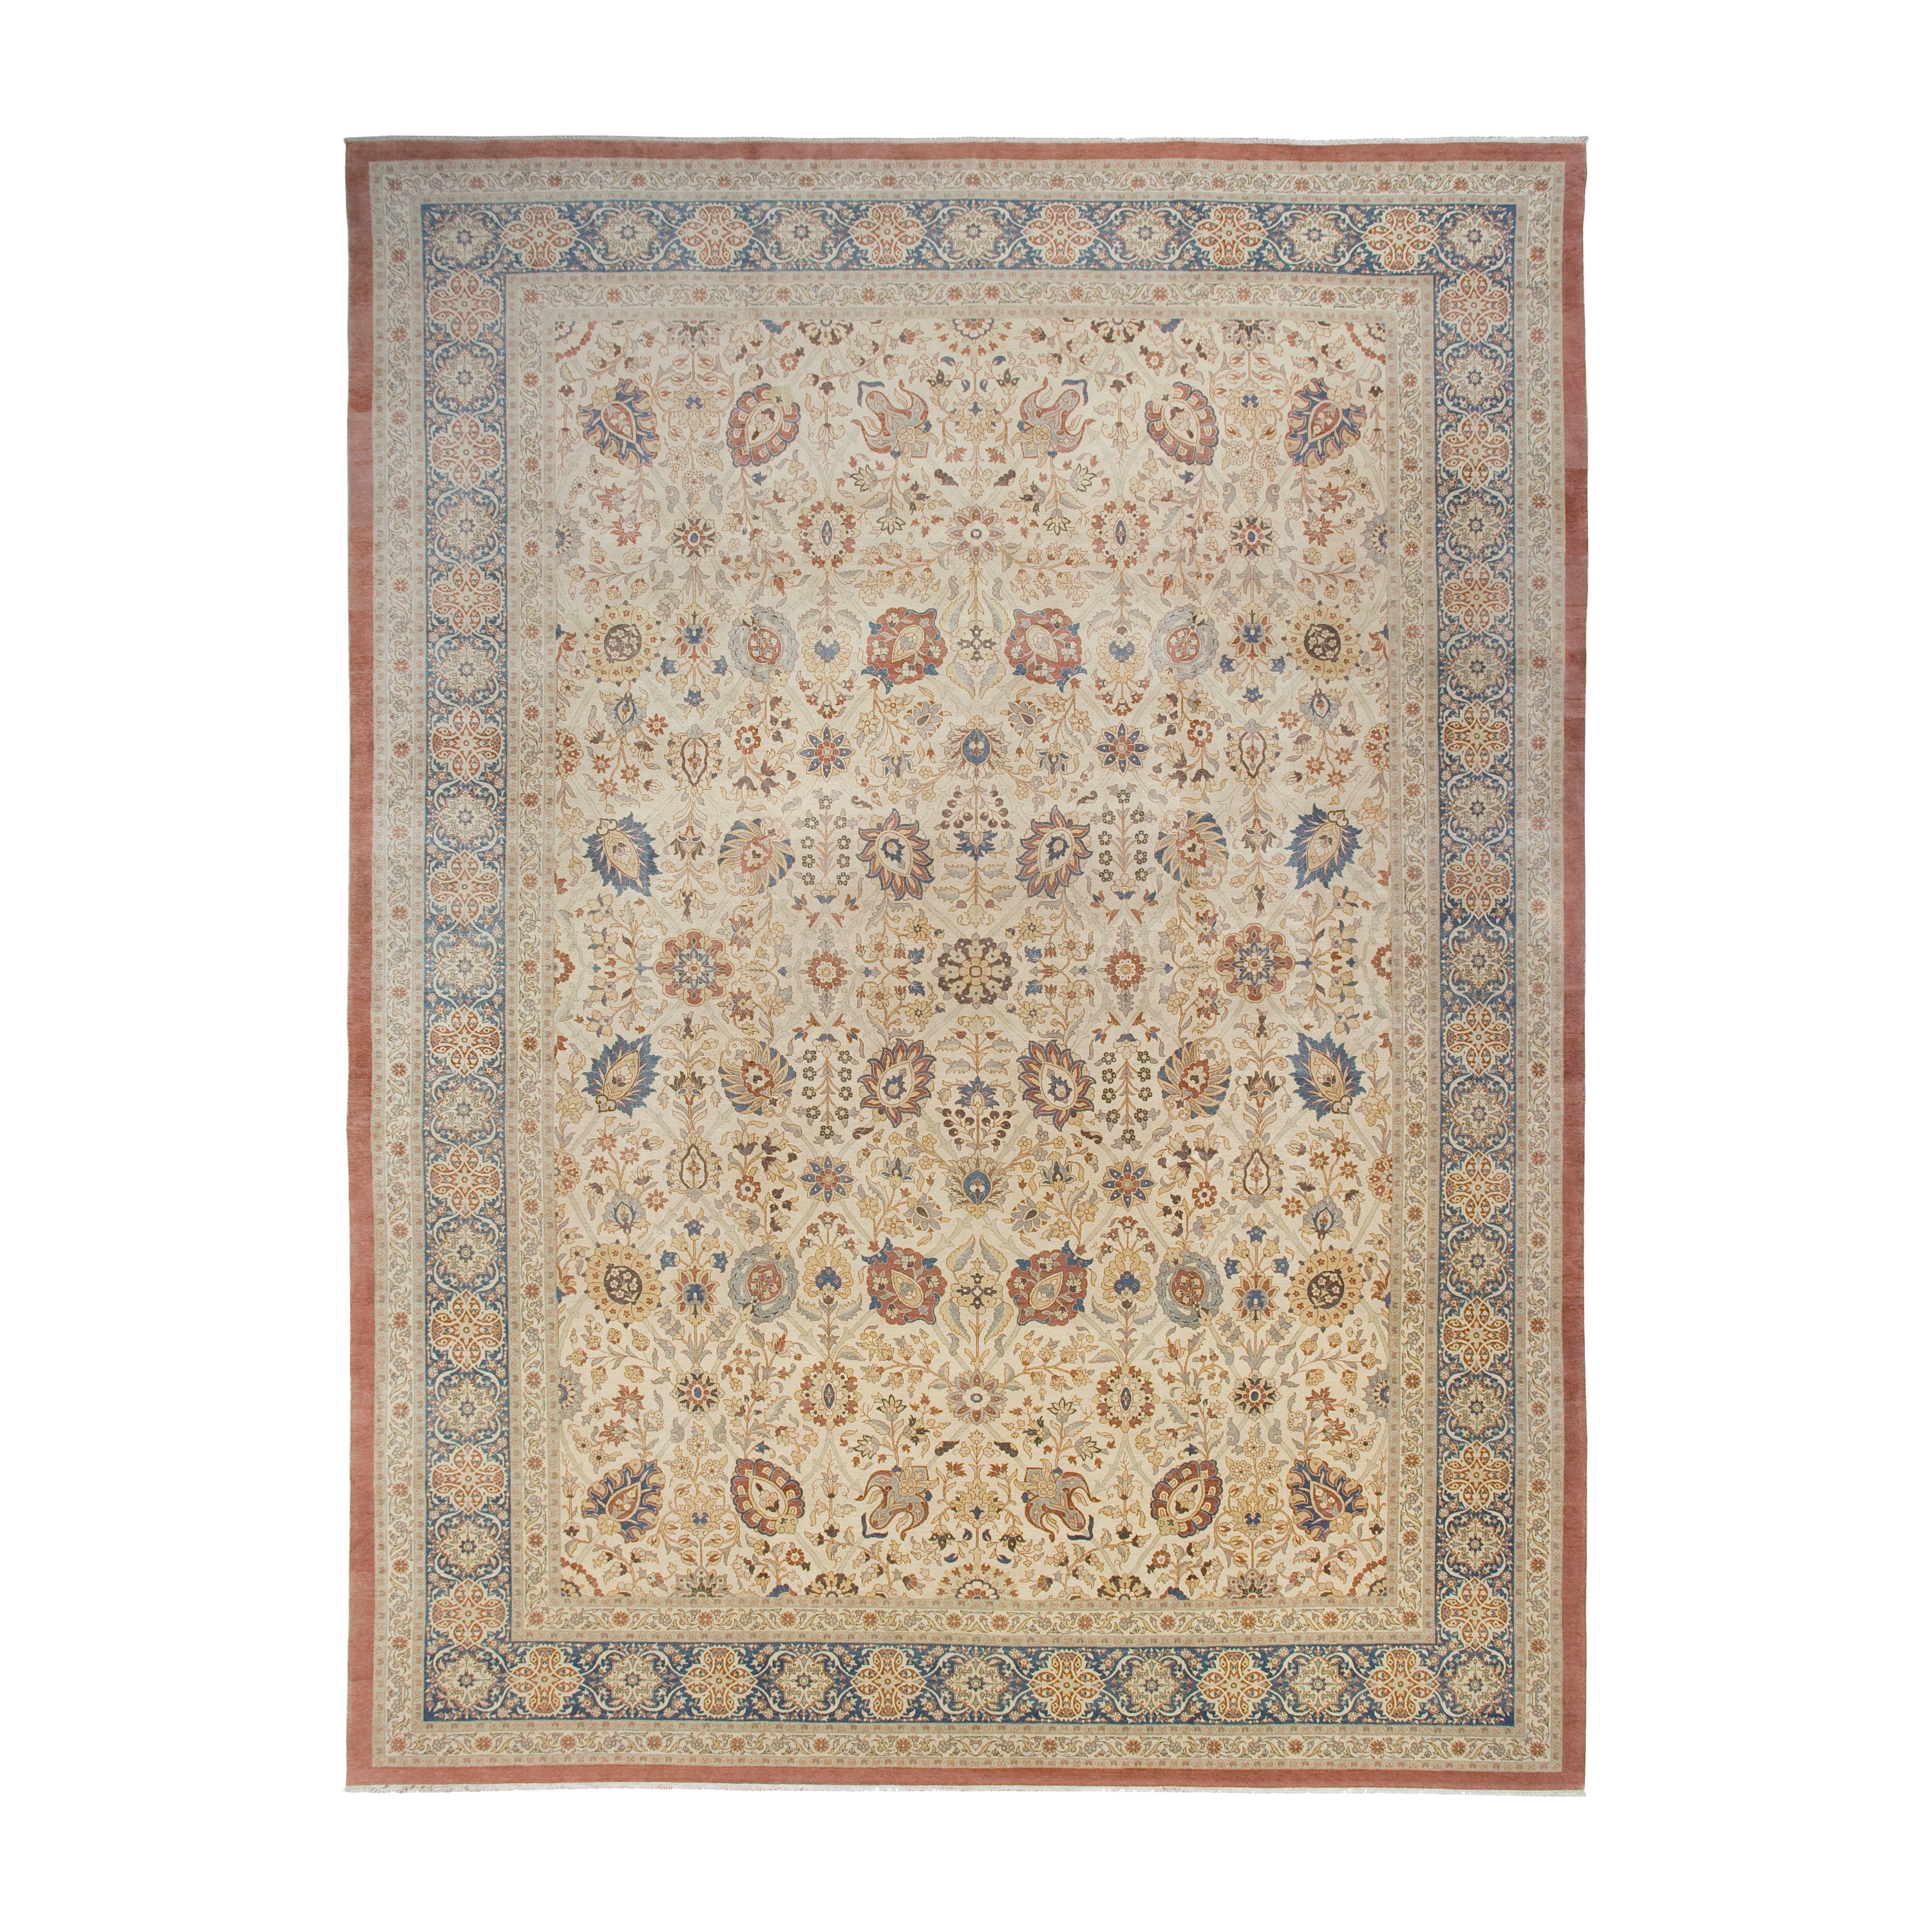 This Persian Tabriz rug is hand-knotted.